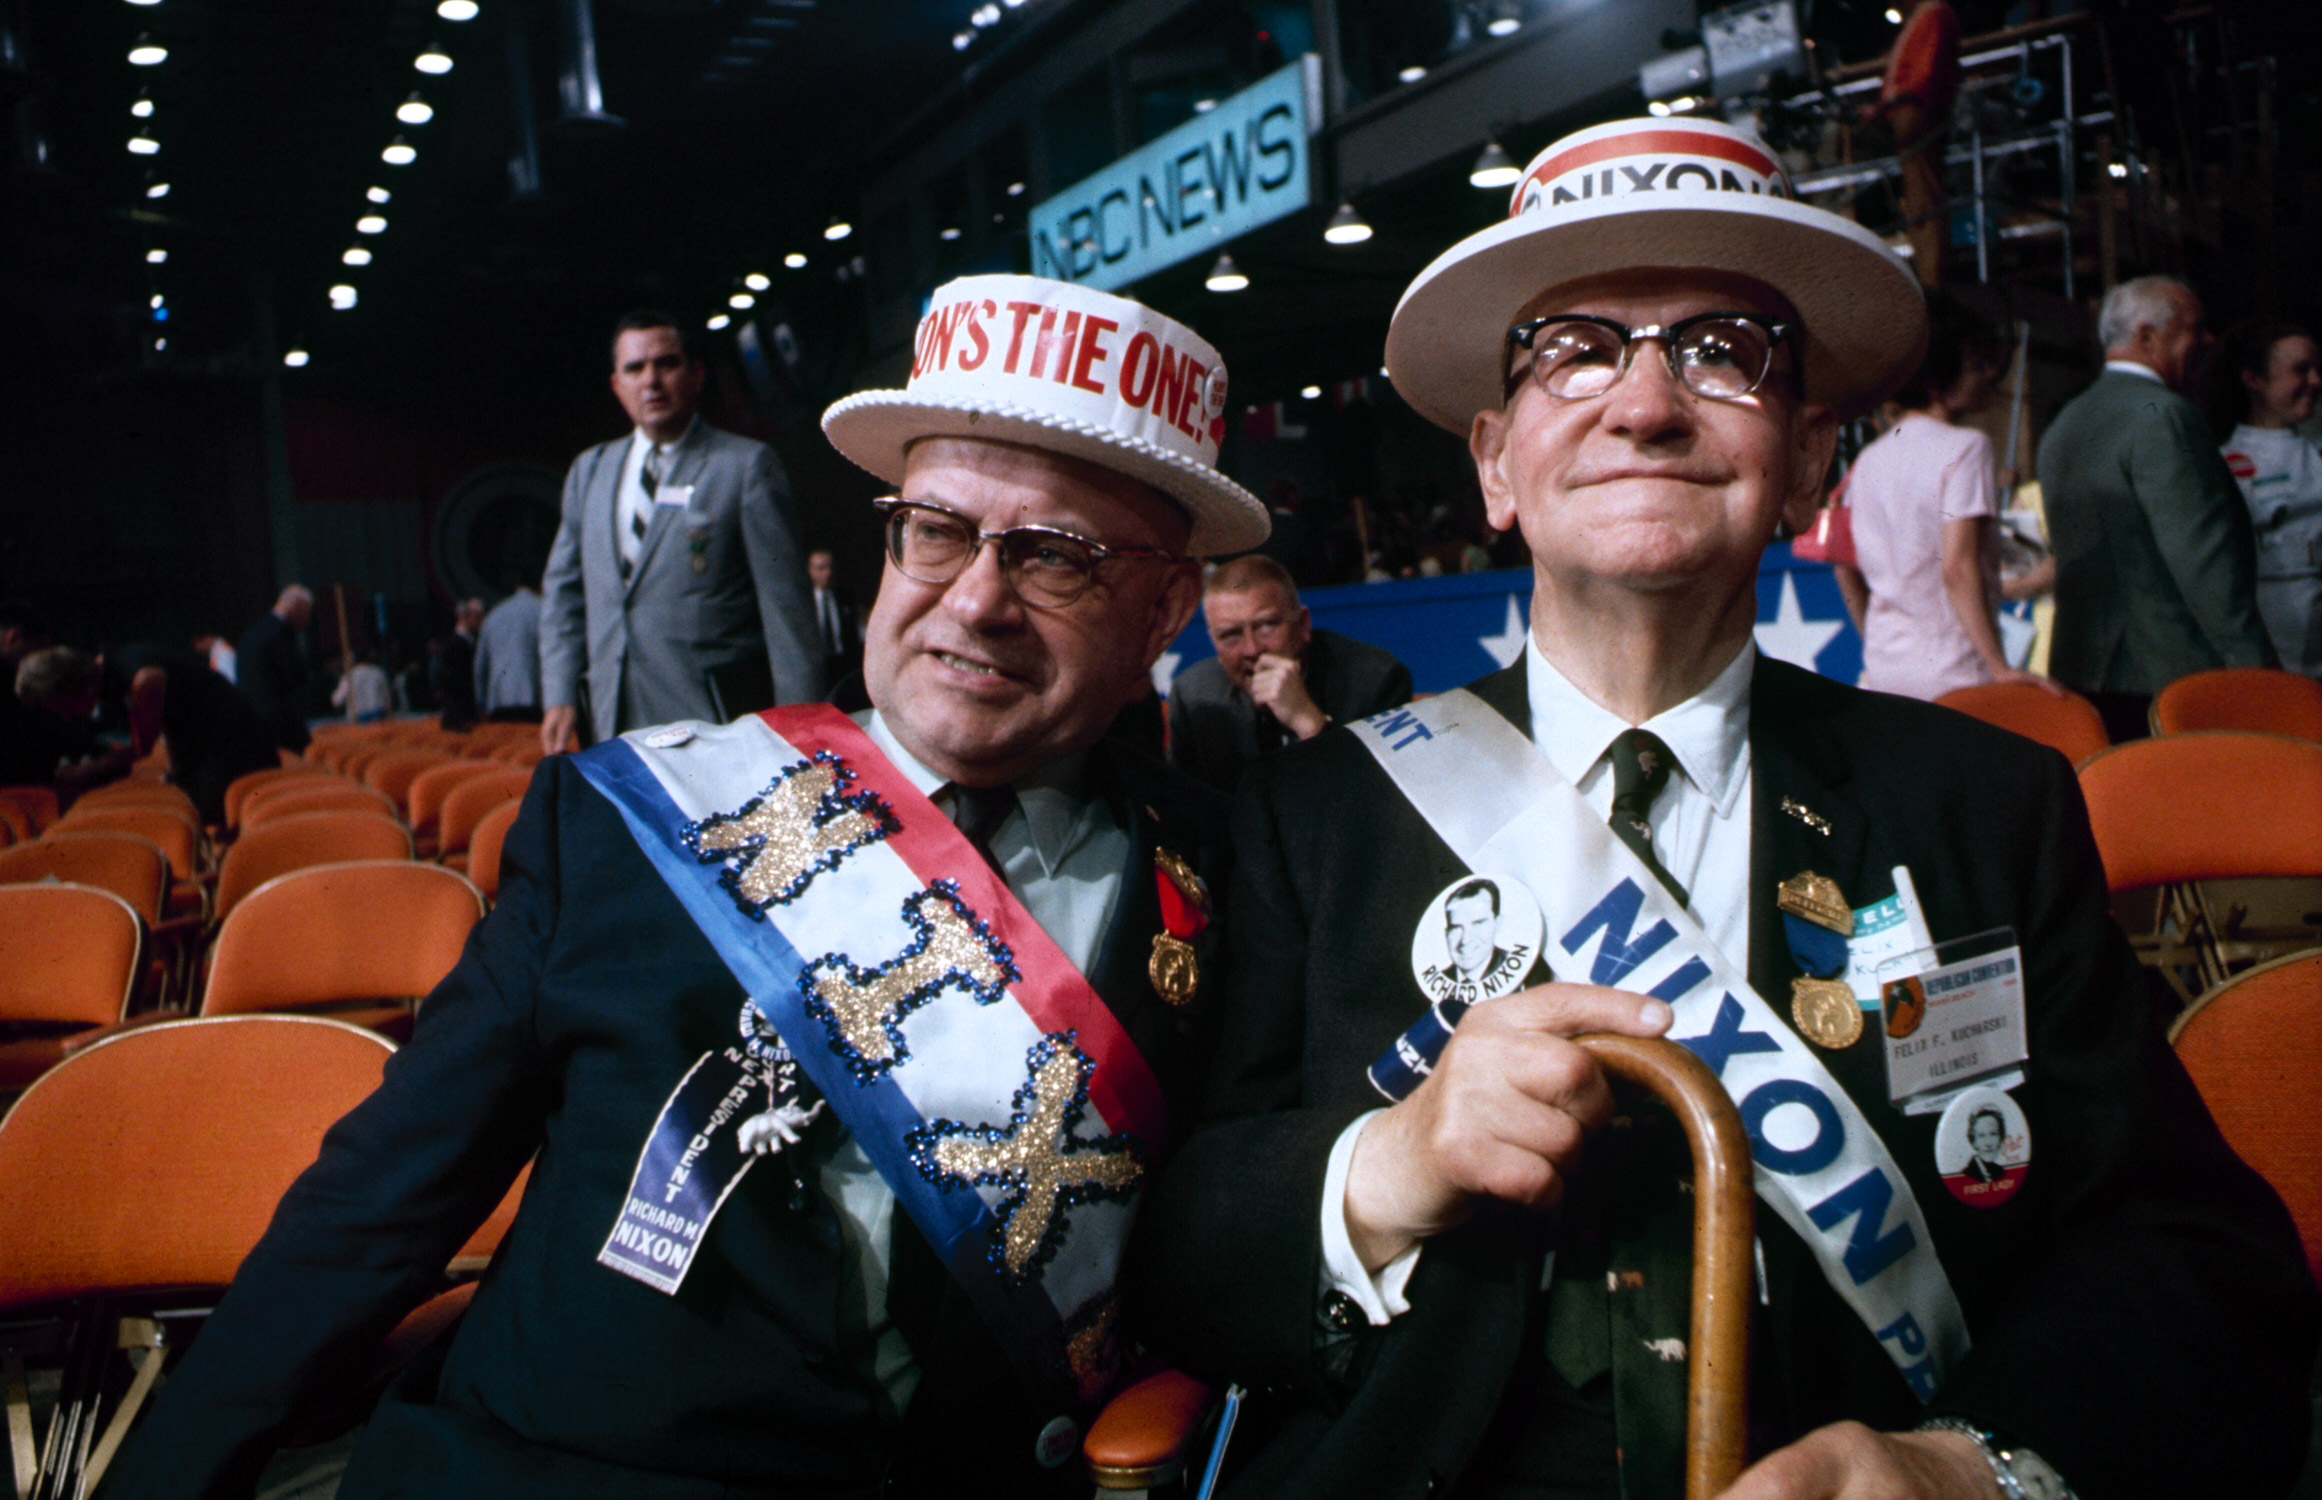 Richard Nixon supporters at the Republican National Convention, 1968.